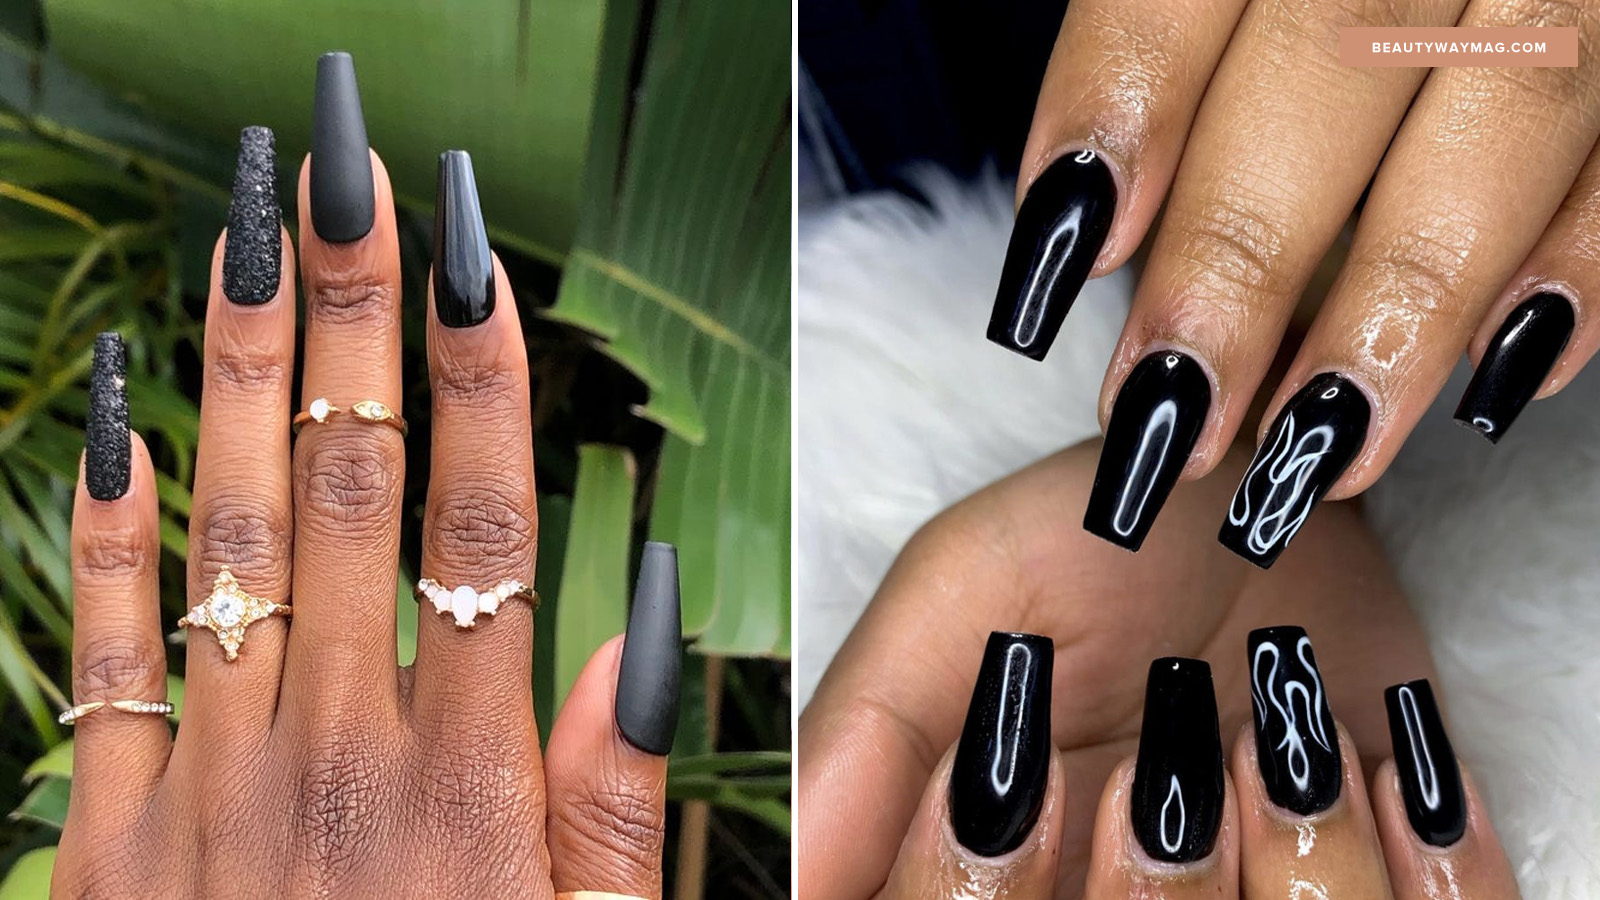 15 Black Coffin Nails To Inspire You Beautywaymag